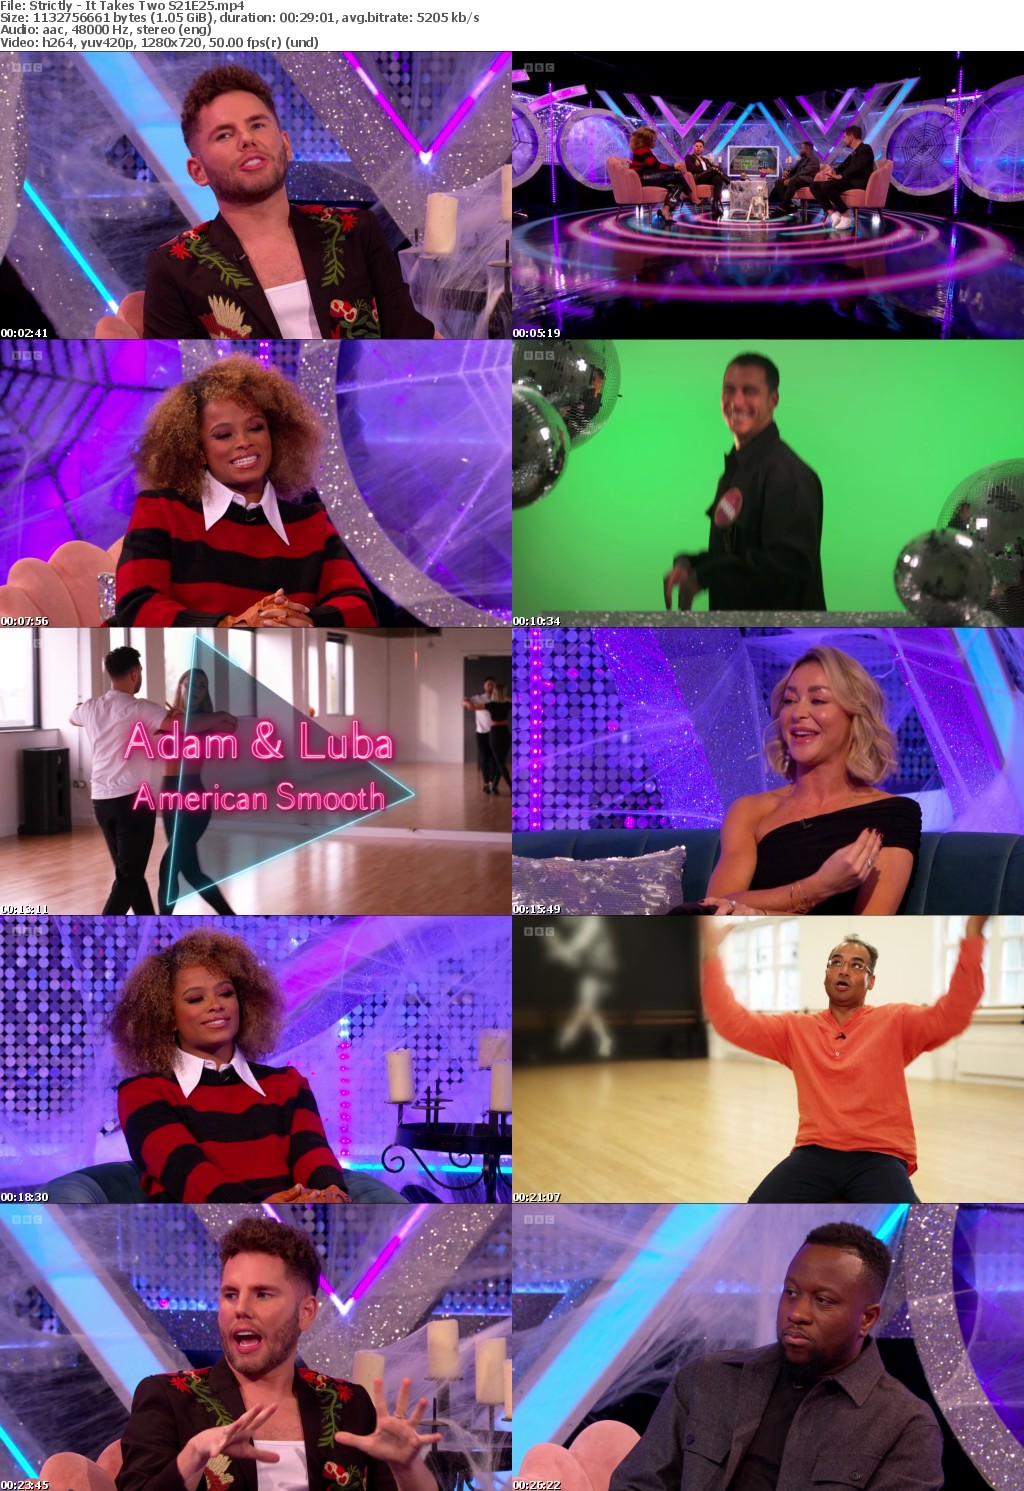 Strictly - It Takes Two S21E25 (1280x720p HD, 50fps, soft Eng subs)